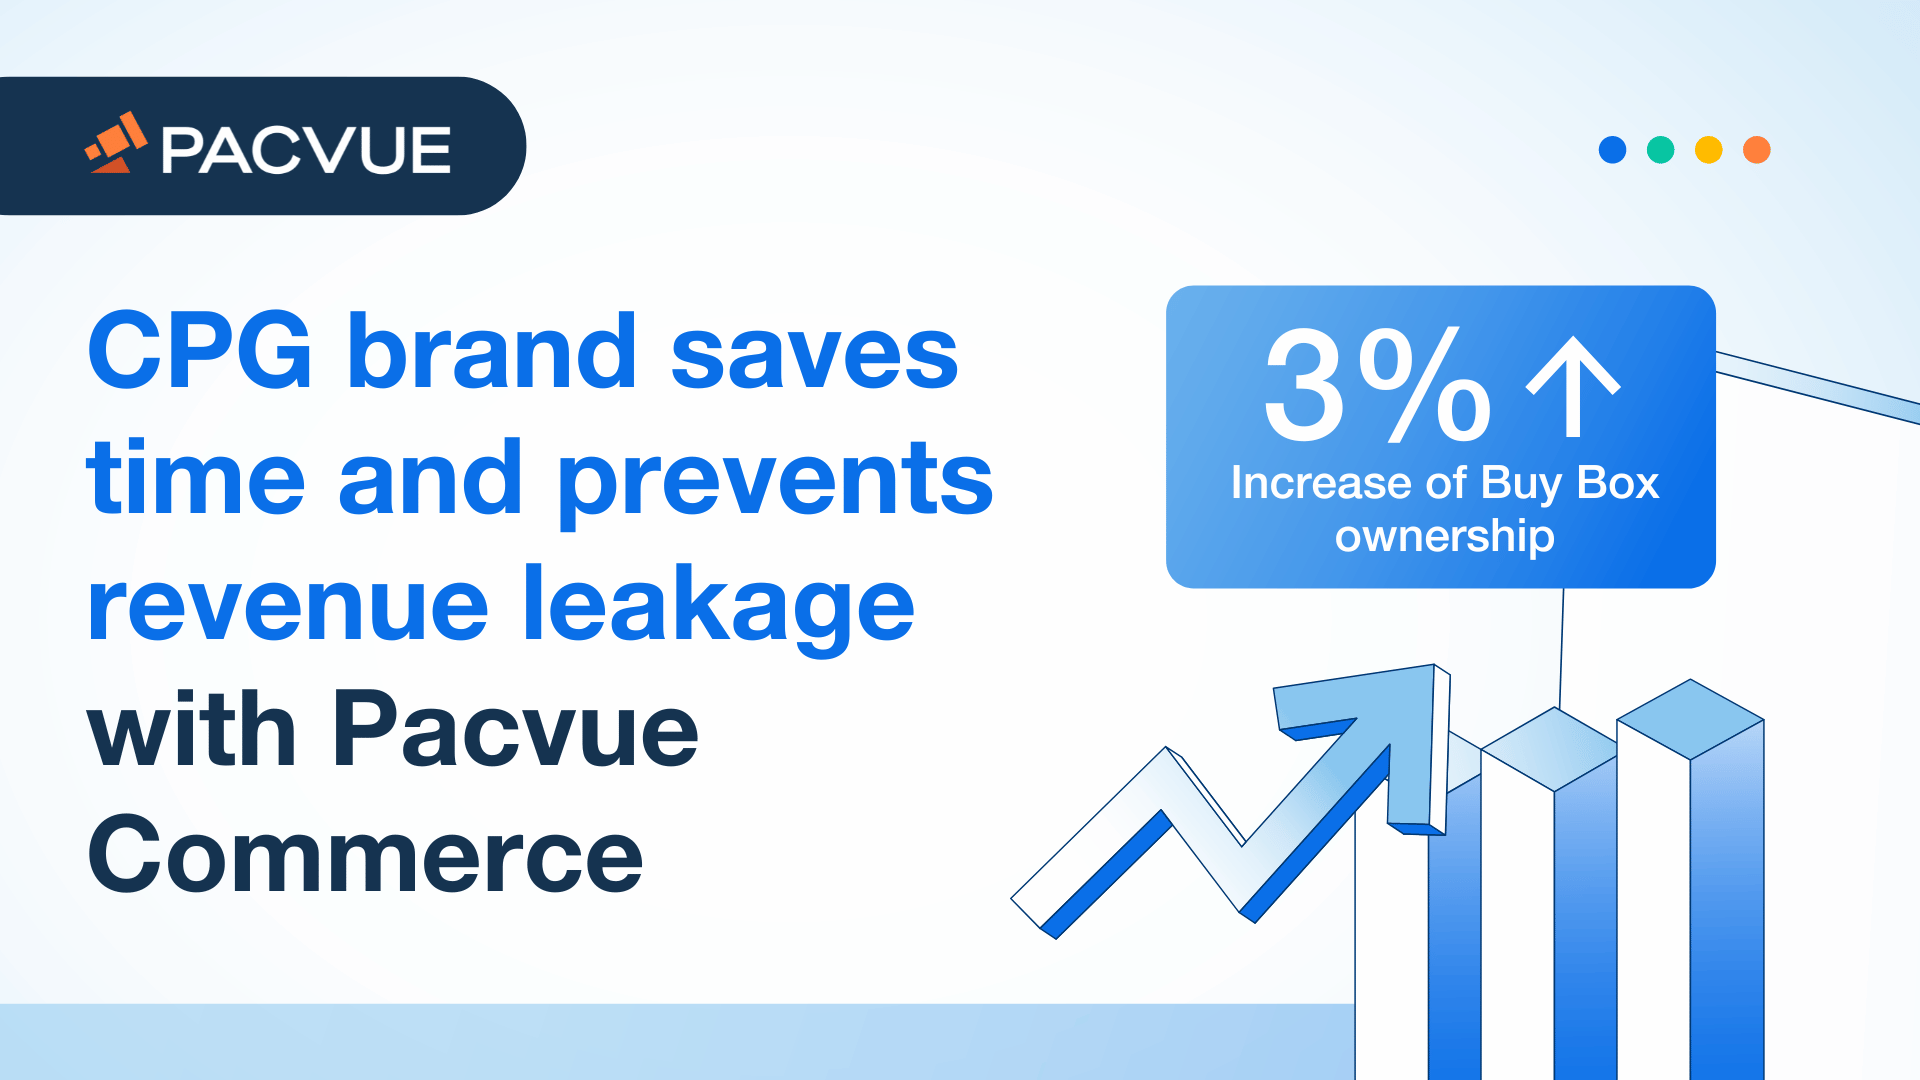 CPG brand saves time and prevents revenue leakage with Pacvue Commerce